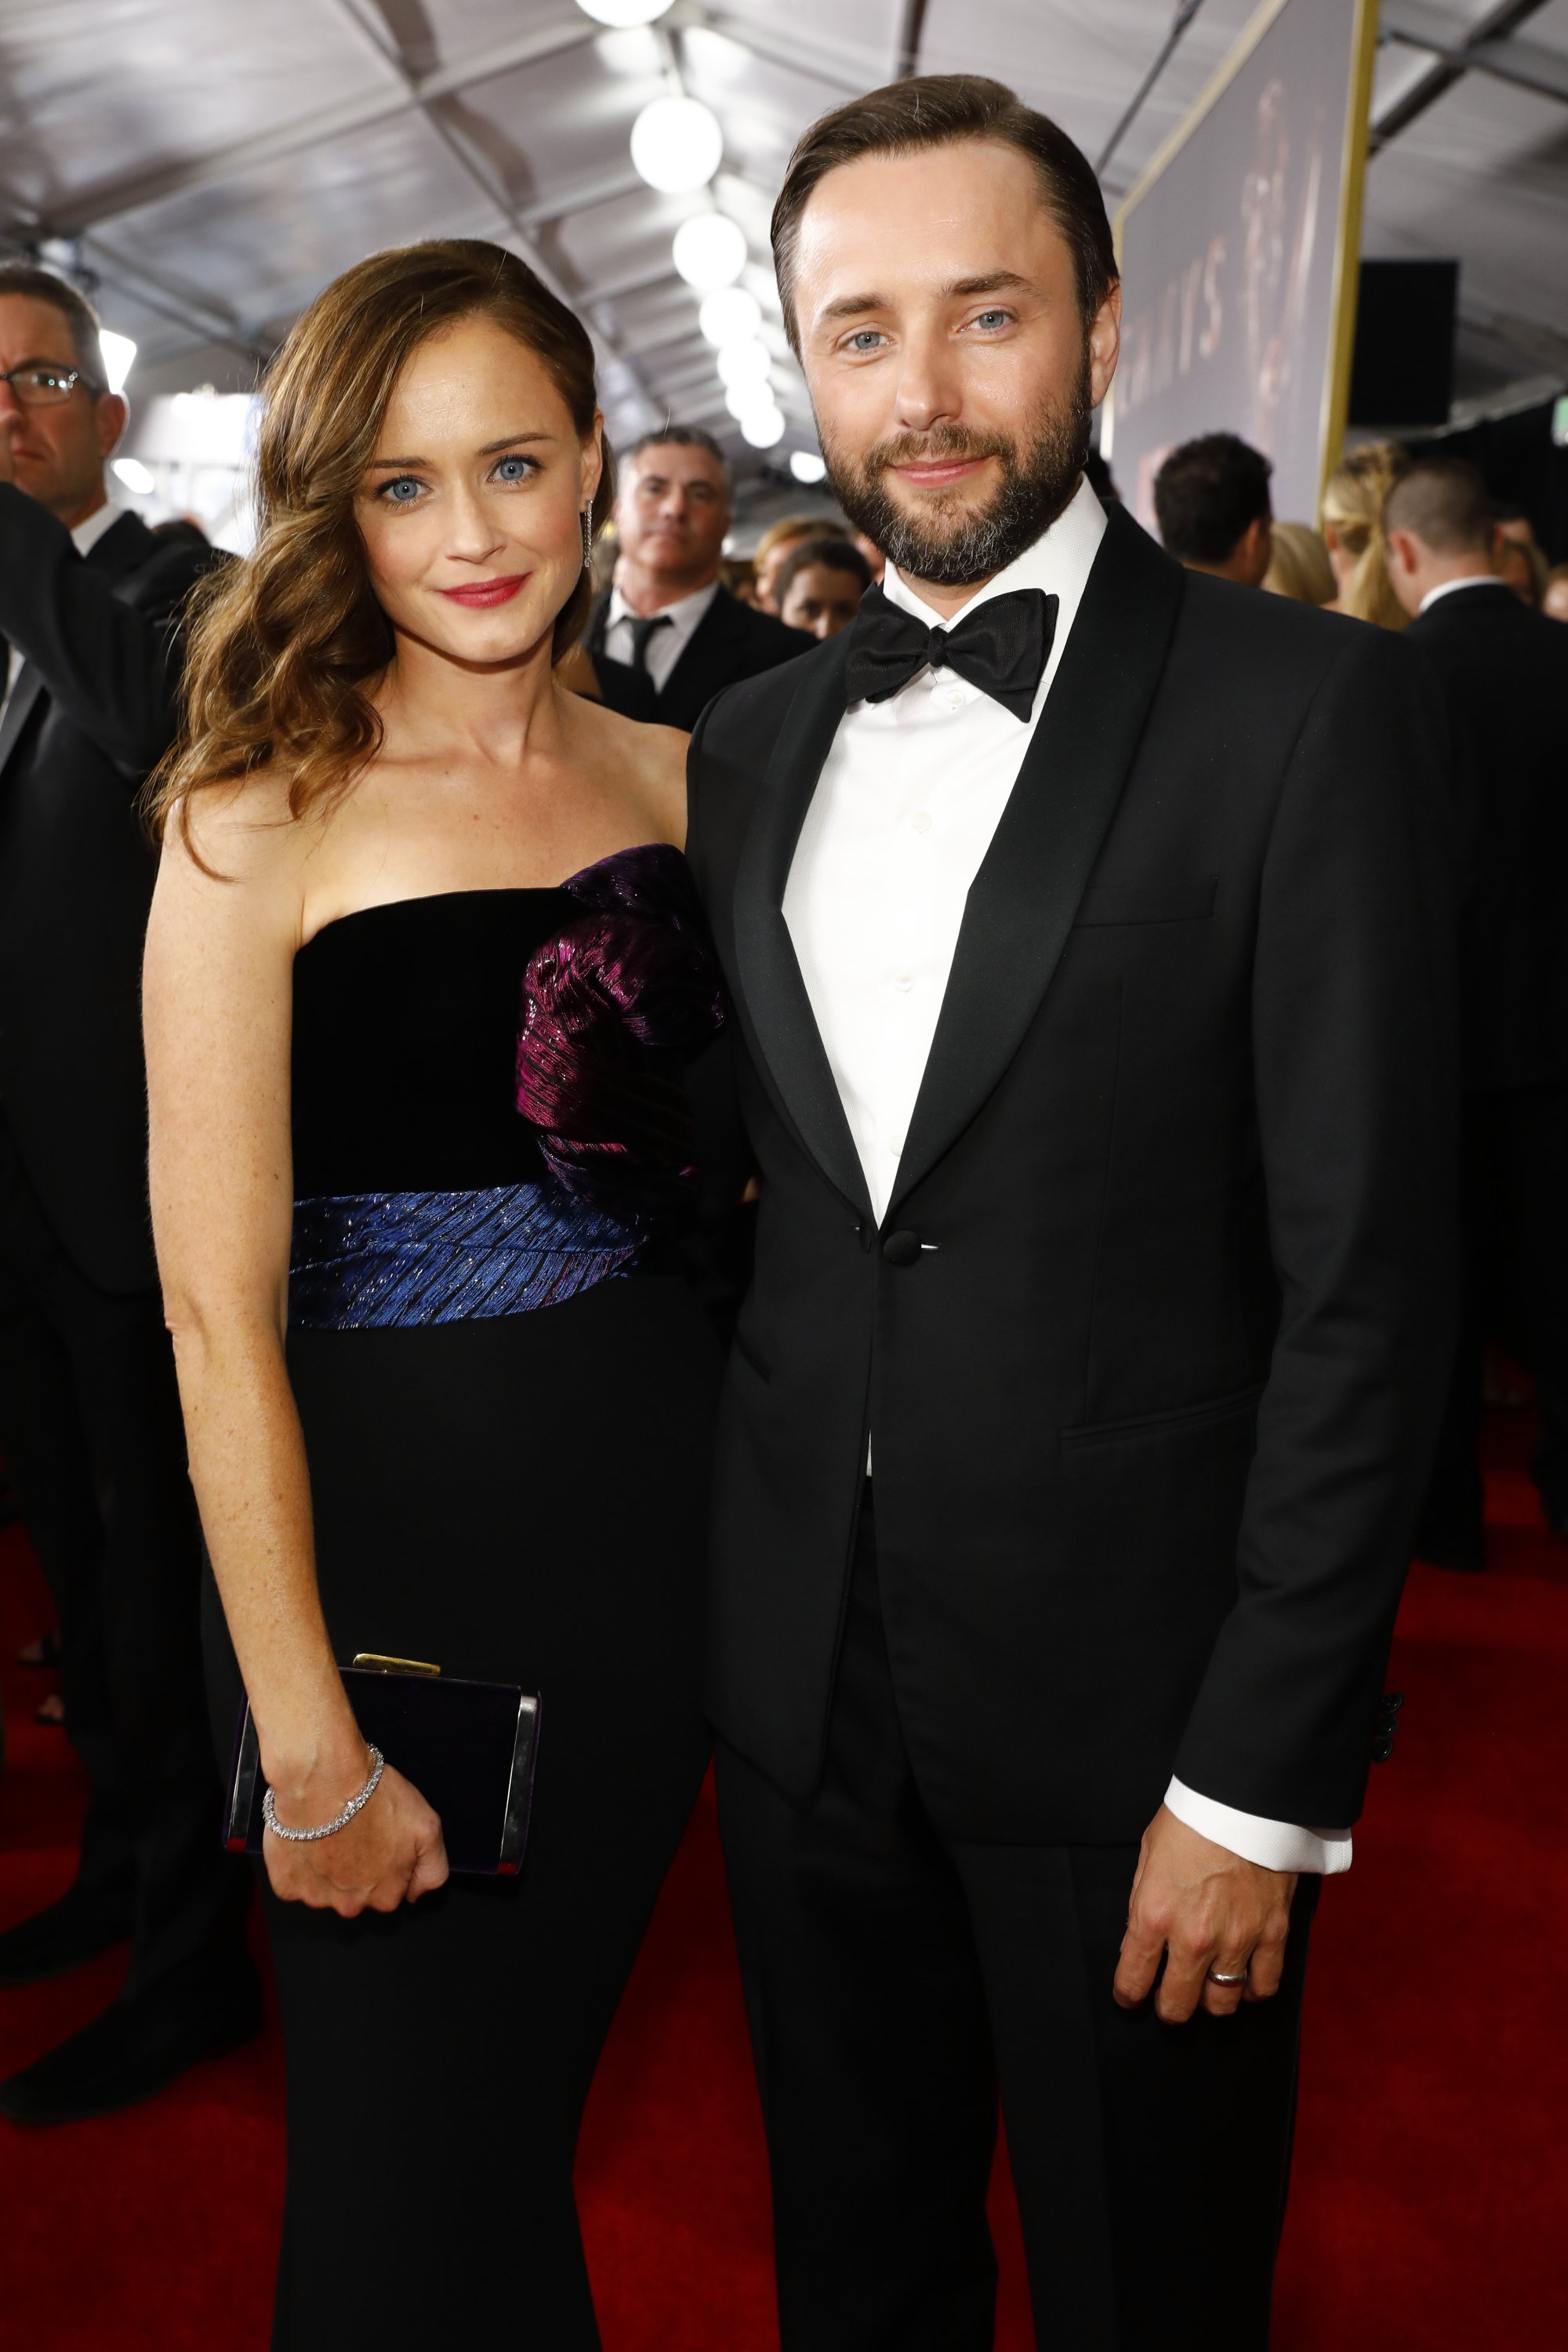 Alexis Bledel and Vincent Kartheiser at the 69th Primetime Emmy Awards | Photo: Getty Images